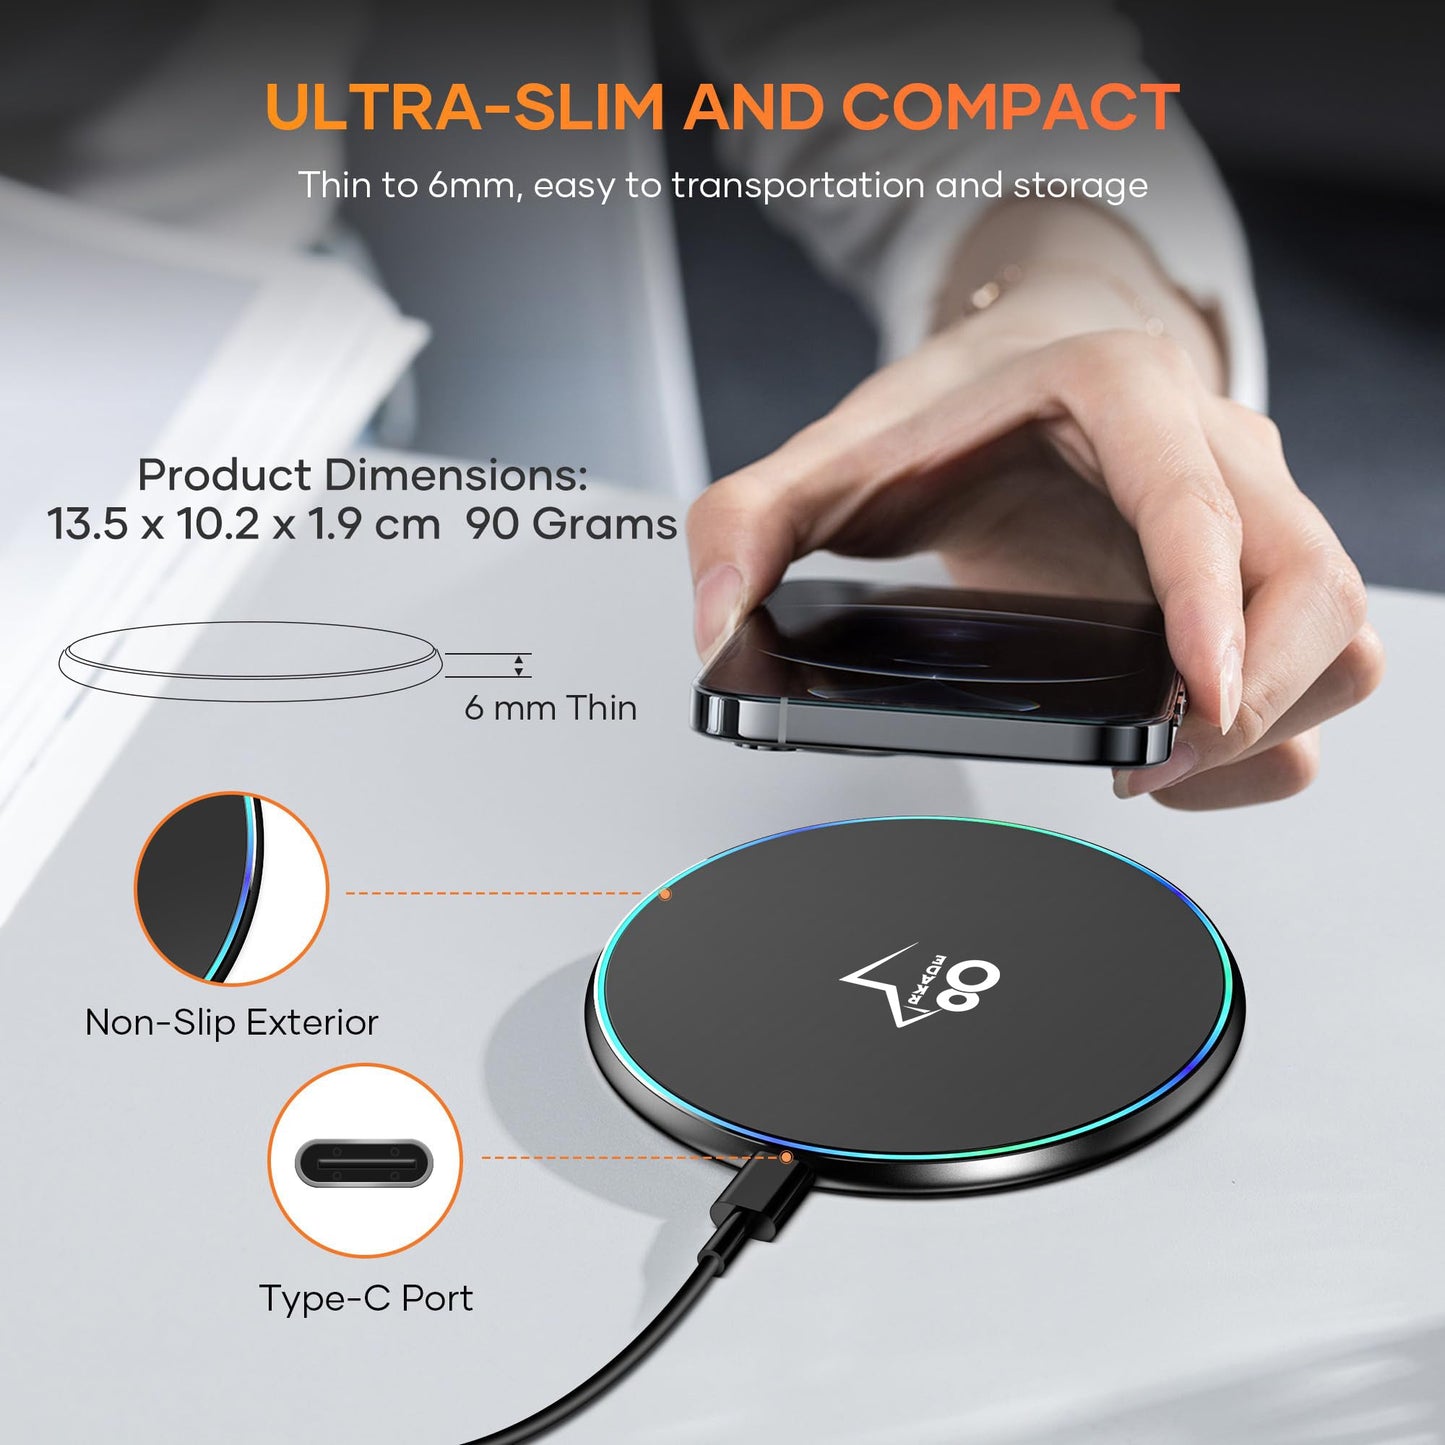 Arkade 87 W8 Wireless Charging Pad with 3.3ft Type-C USB Charging Cable